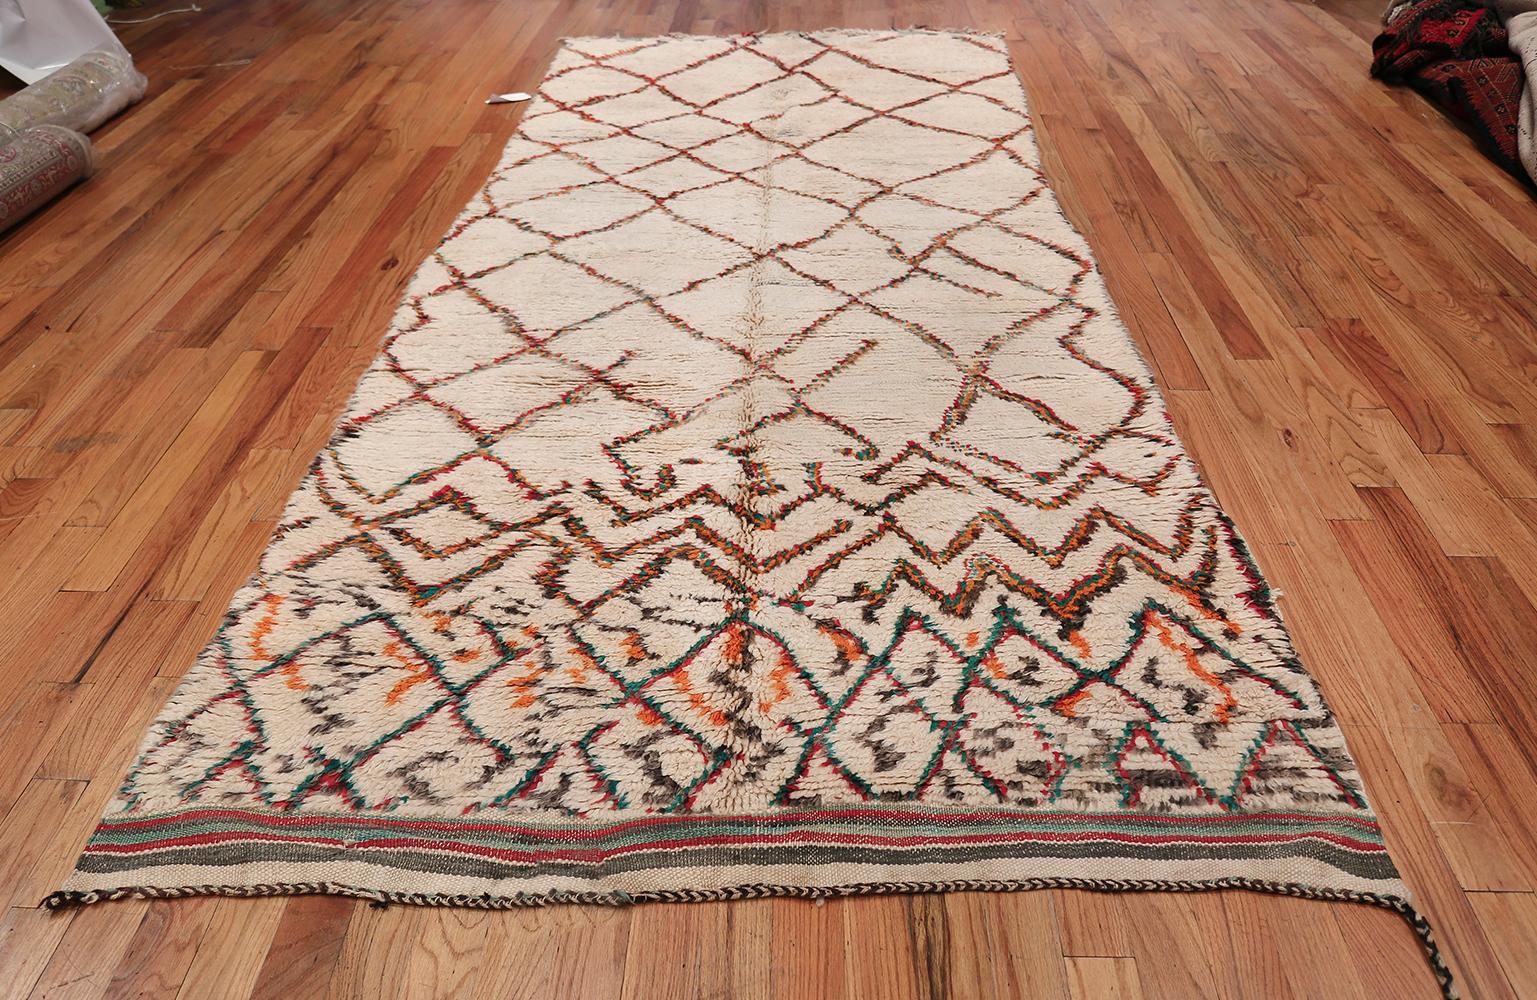 Beautiful And Quite Tribal Vintage Ivory Shag Pile Moroccan Berber Rug, Country of Origin / Rug Type: Morocco, Circa Date: Mid – 20th Century – This beautiful vintage mid century Moroccan rug is an excellent example of the fine weaving and